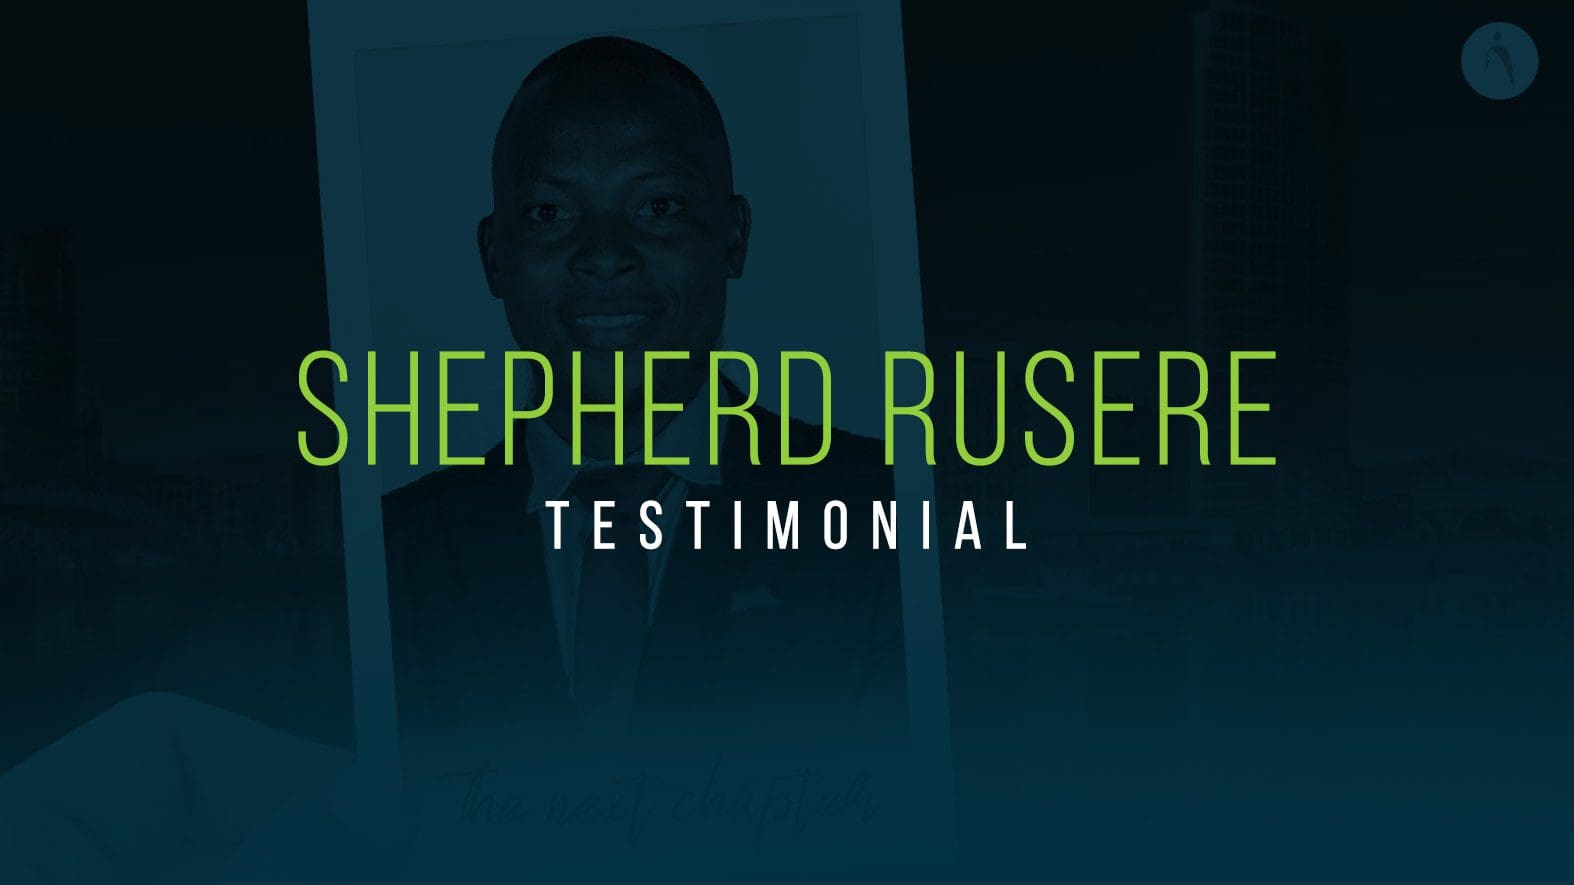 Meet Shepherd Rusere, our Talent Professional from Zimbabwe who is successfully placed in the UK.